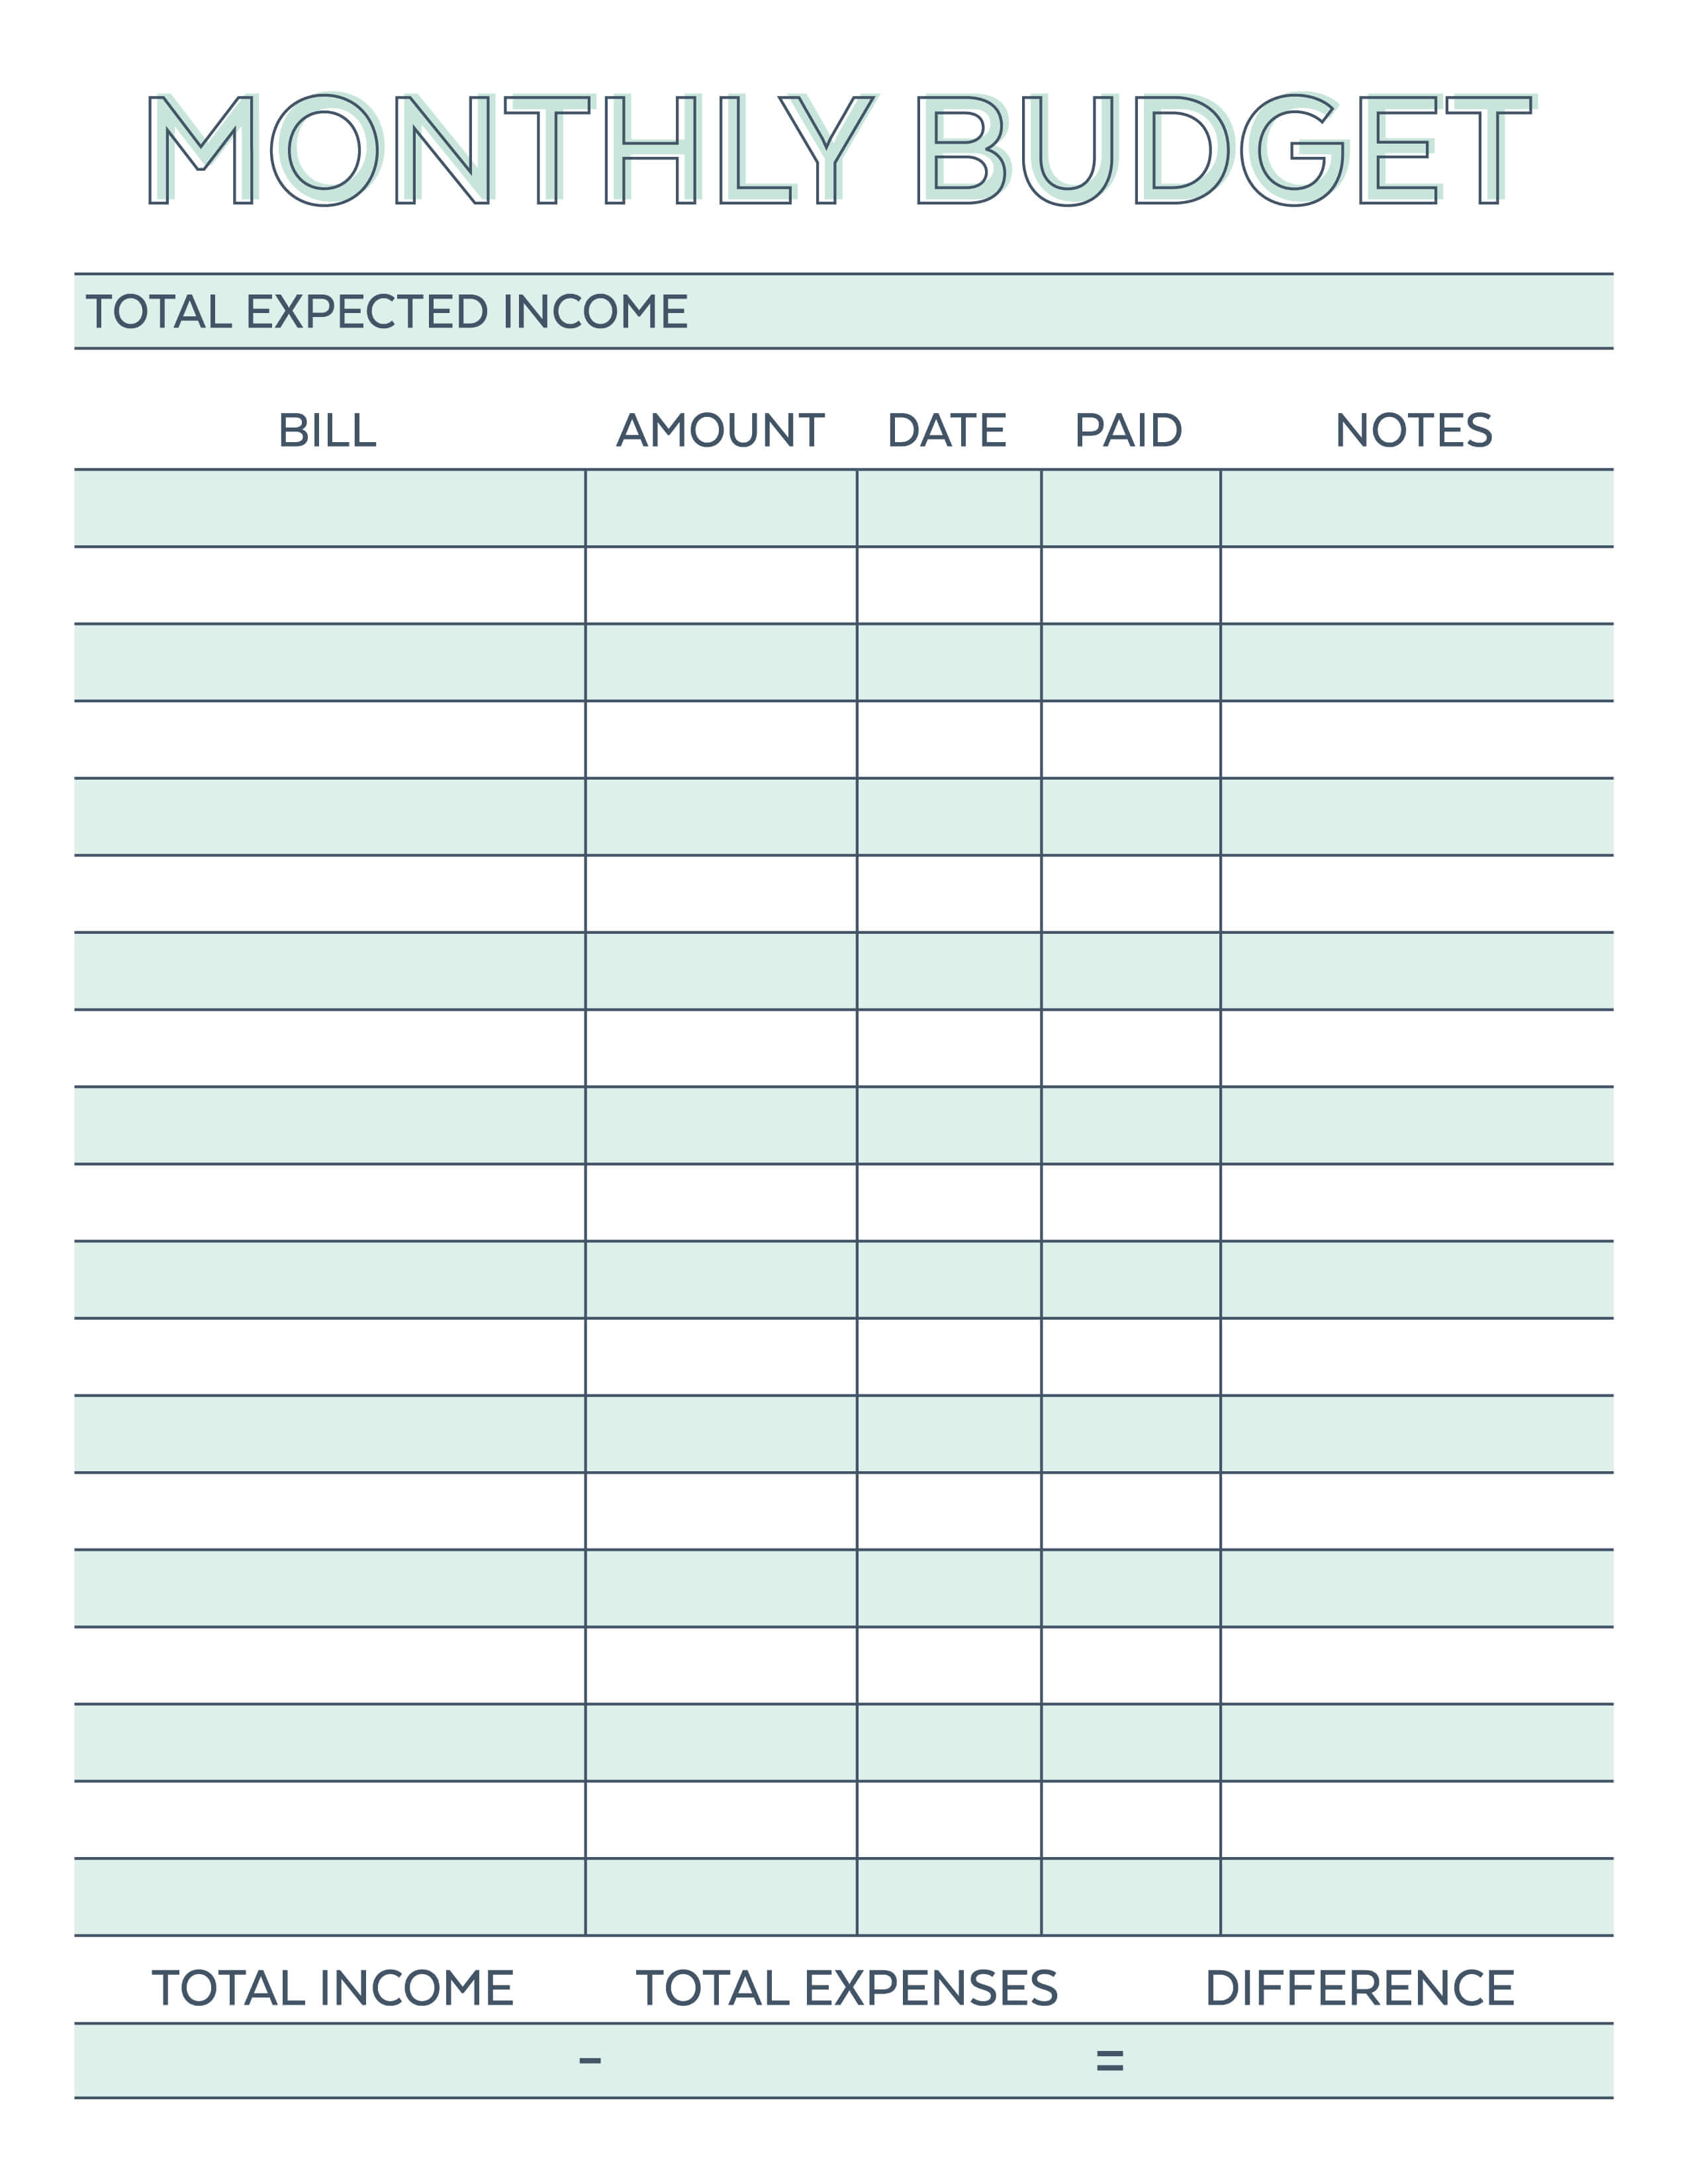 Monthly Budget Planner - Free Printable Budget Worksheet - Free Printable Financial Planner 2017